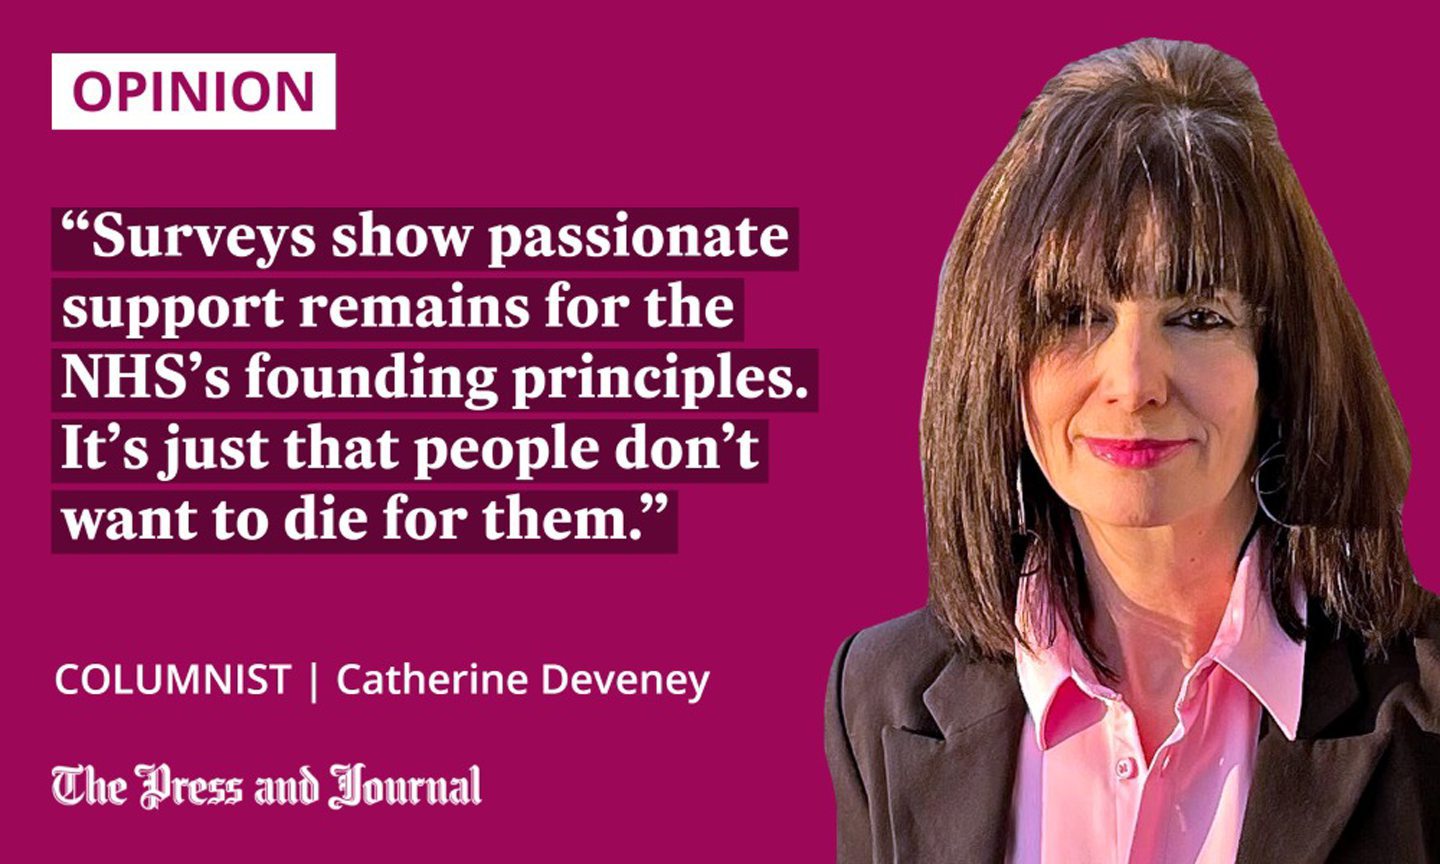 Quotation from columnist Catherine Deveney on the 75th anniversary of the NHS: 'Surveys show passionate support remains for the NHS’s founding principles. It’s just that people don’t want to die for them.'